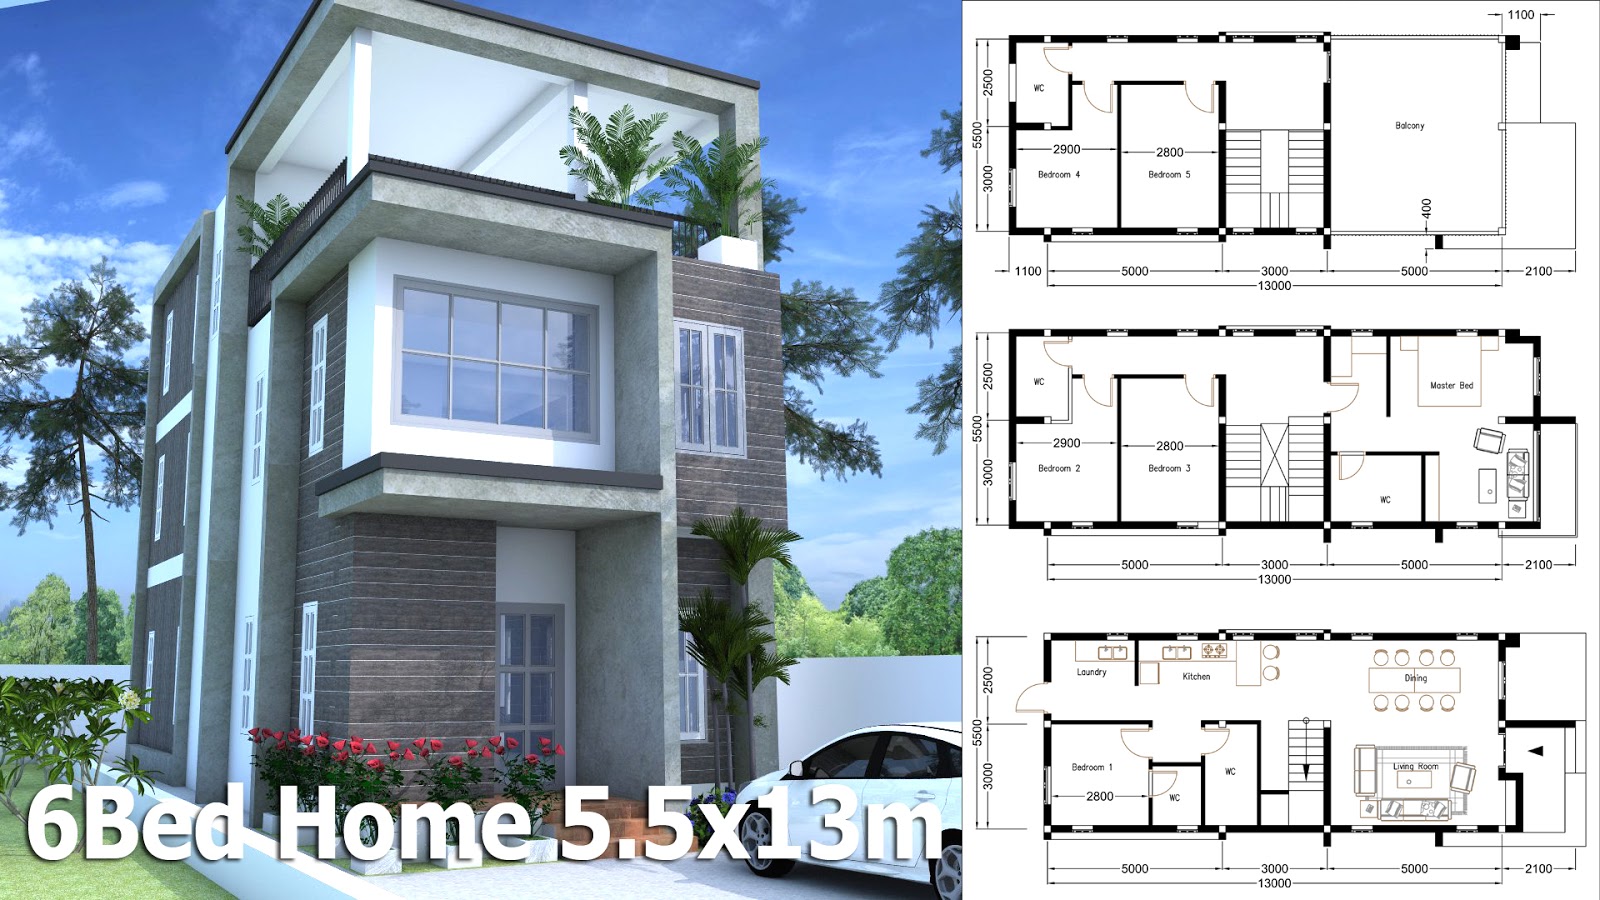 SketchUp Modern Home Plan 5 5x13m With 6 Bedroom 